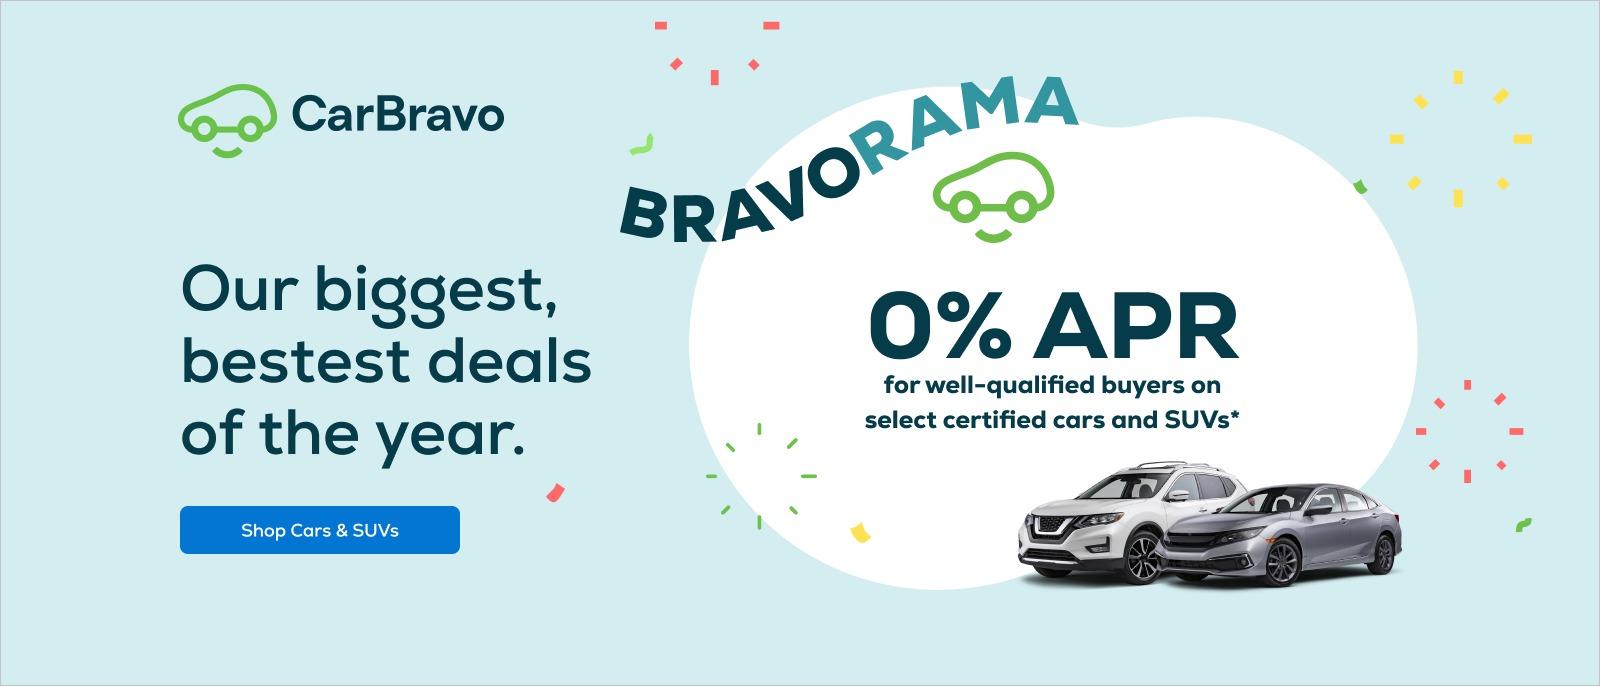 Bravorama 0% APR for well-qualified buyers on select certified cars and SUV's